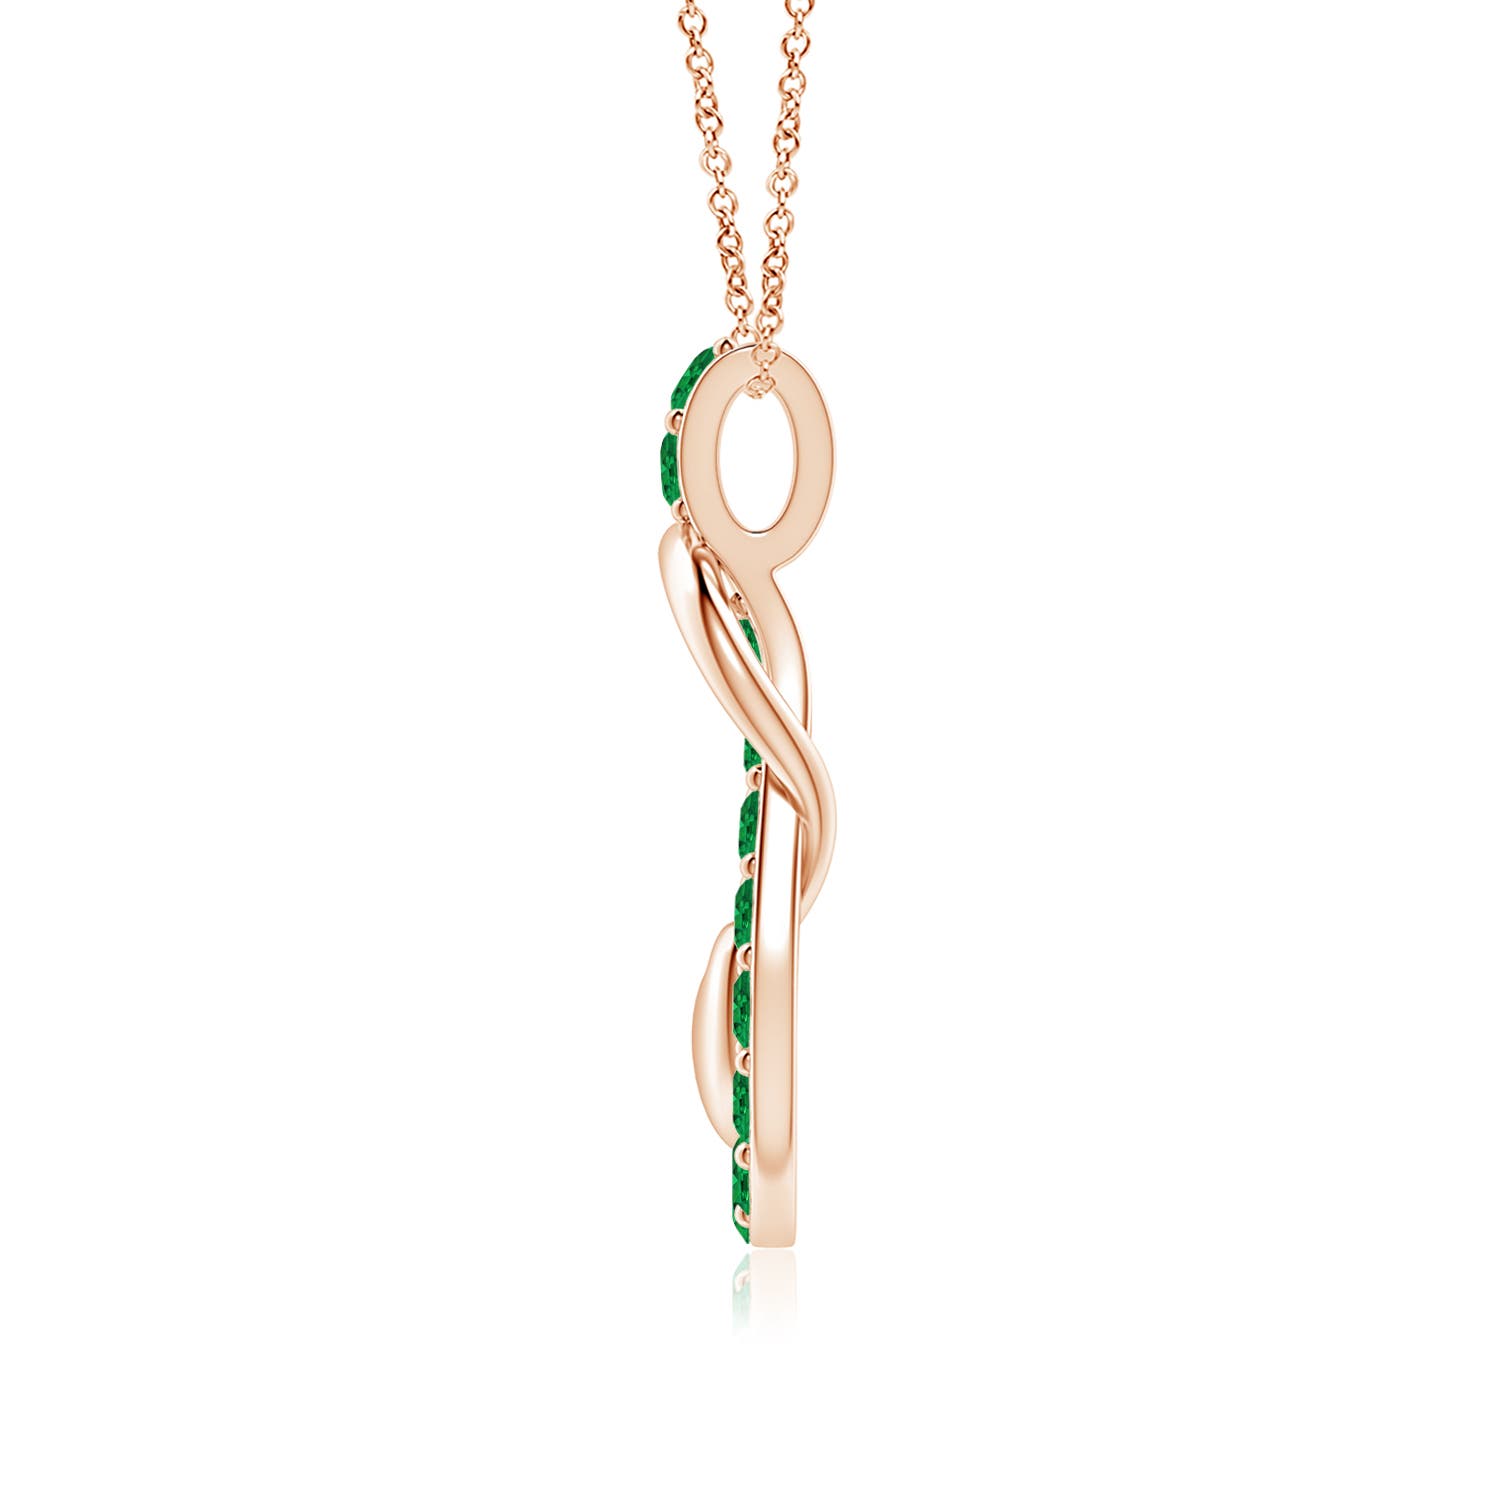 AAA - Emerald / 1.9 CT / 18 KT Rose Gold